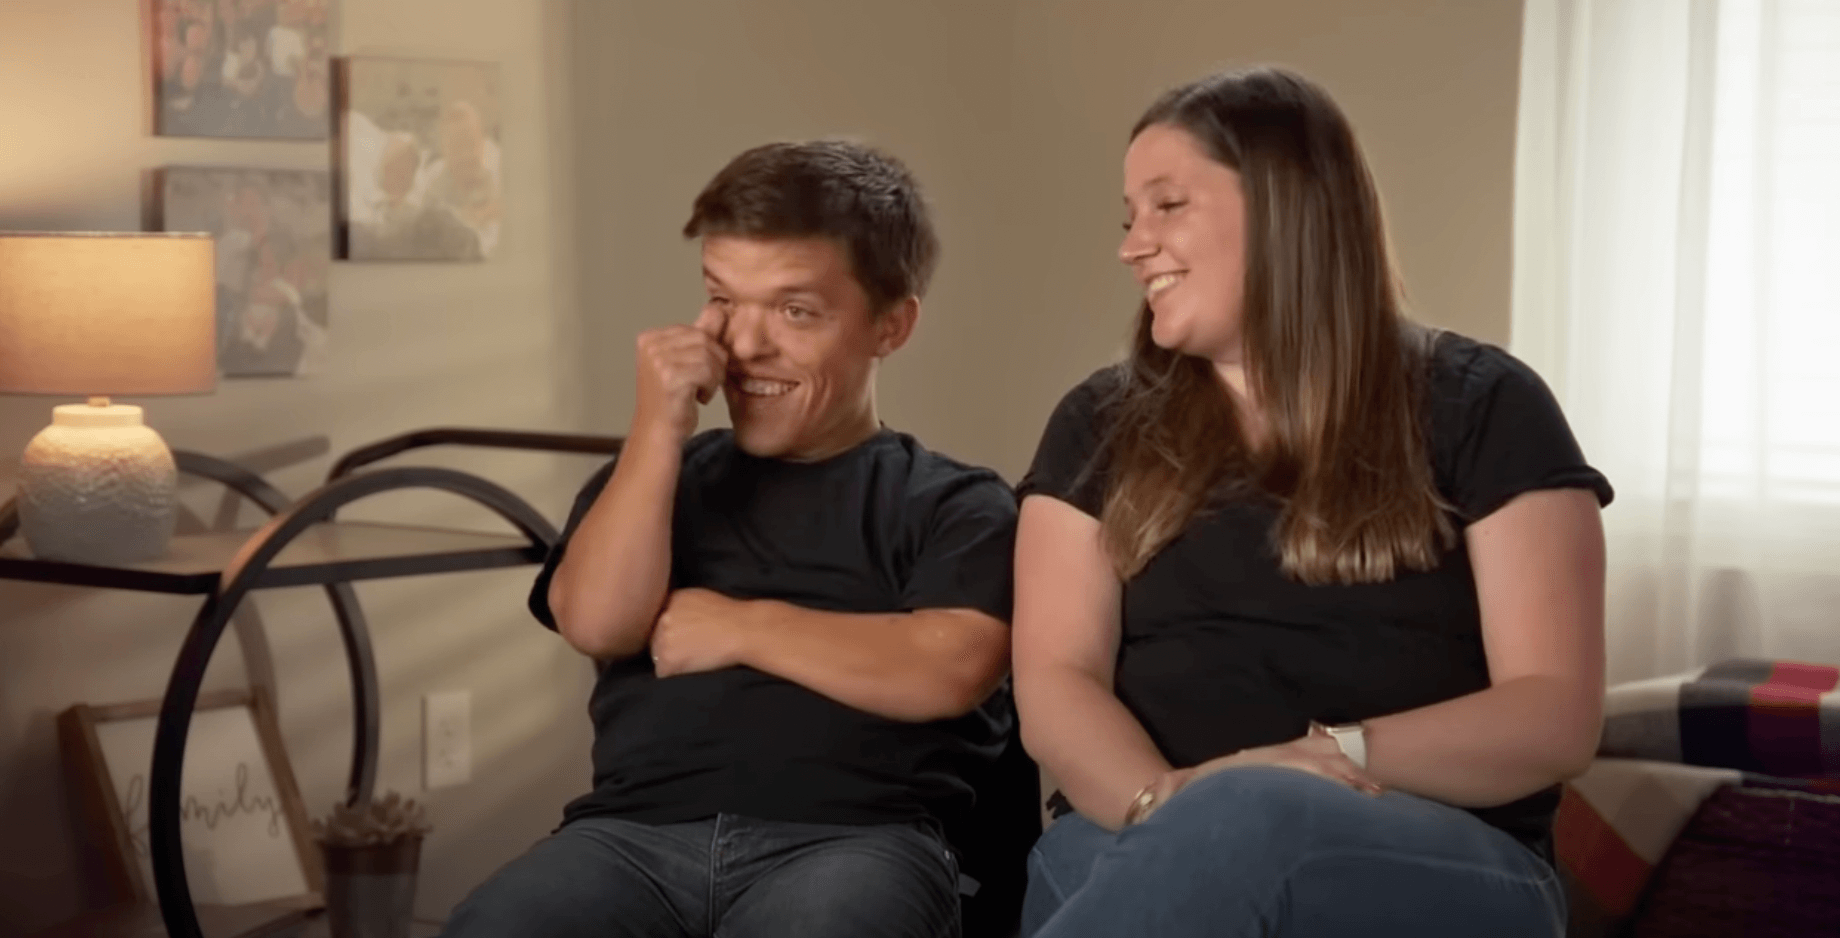 Zach Roloff and Tori Roloff talking during an interview in 'Little People, Big World'